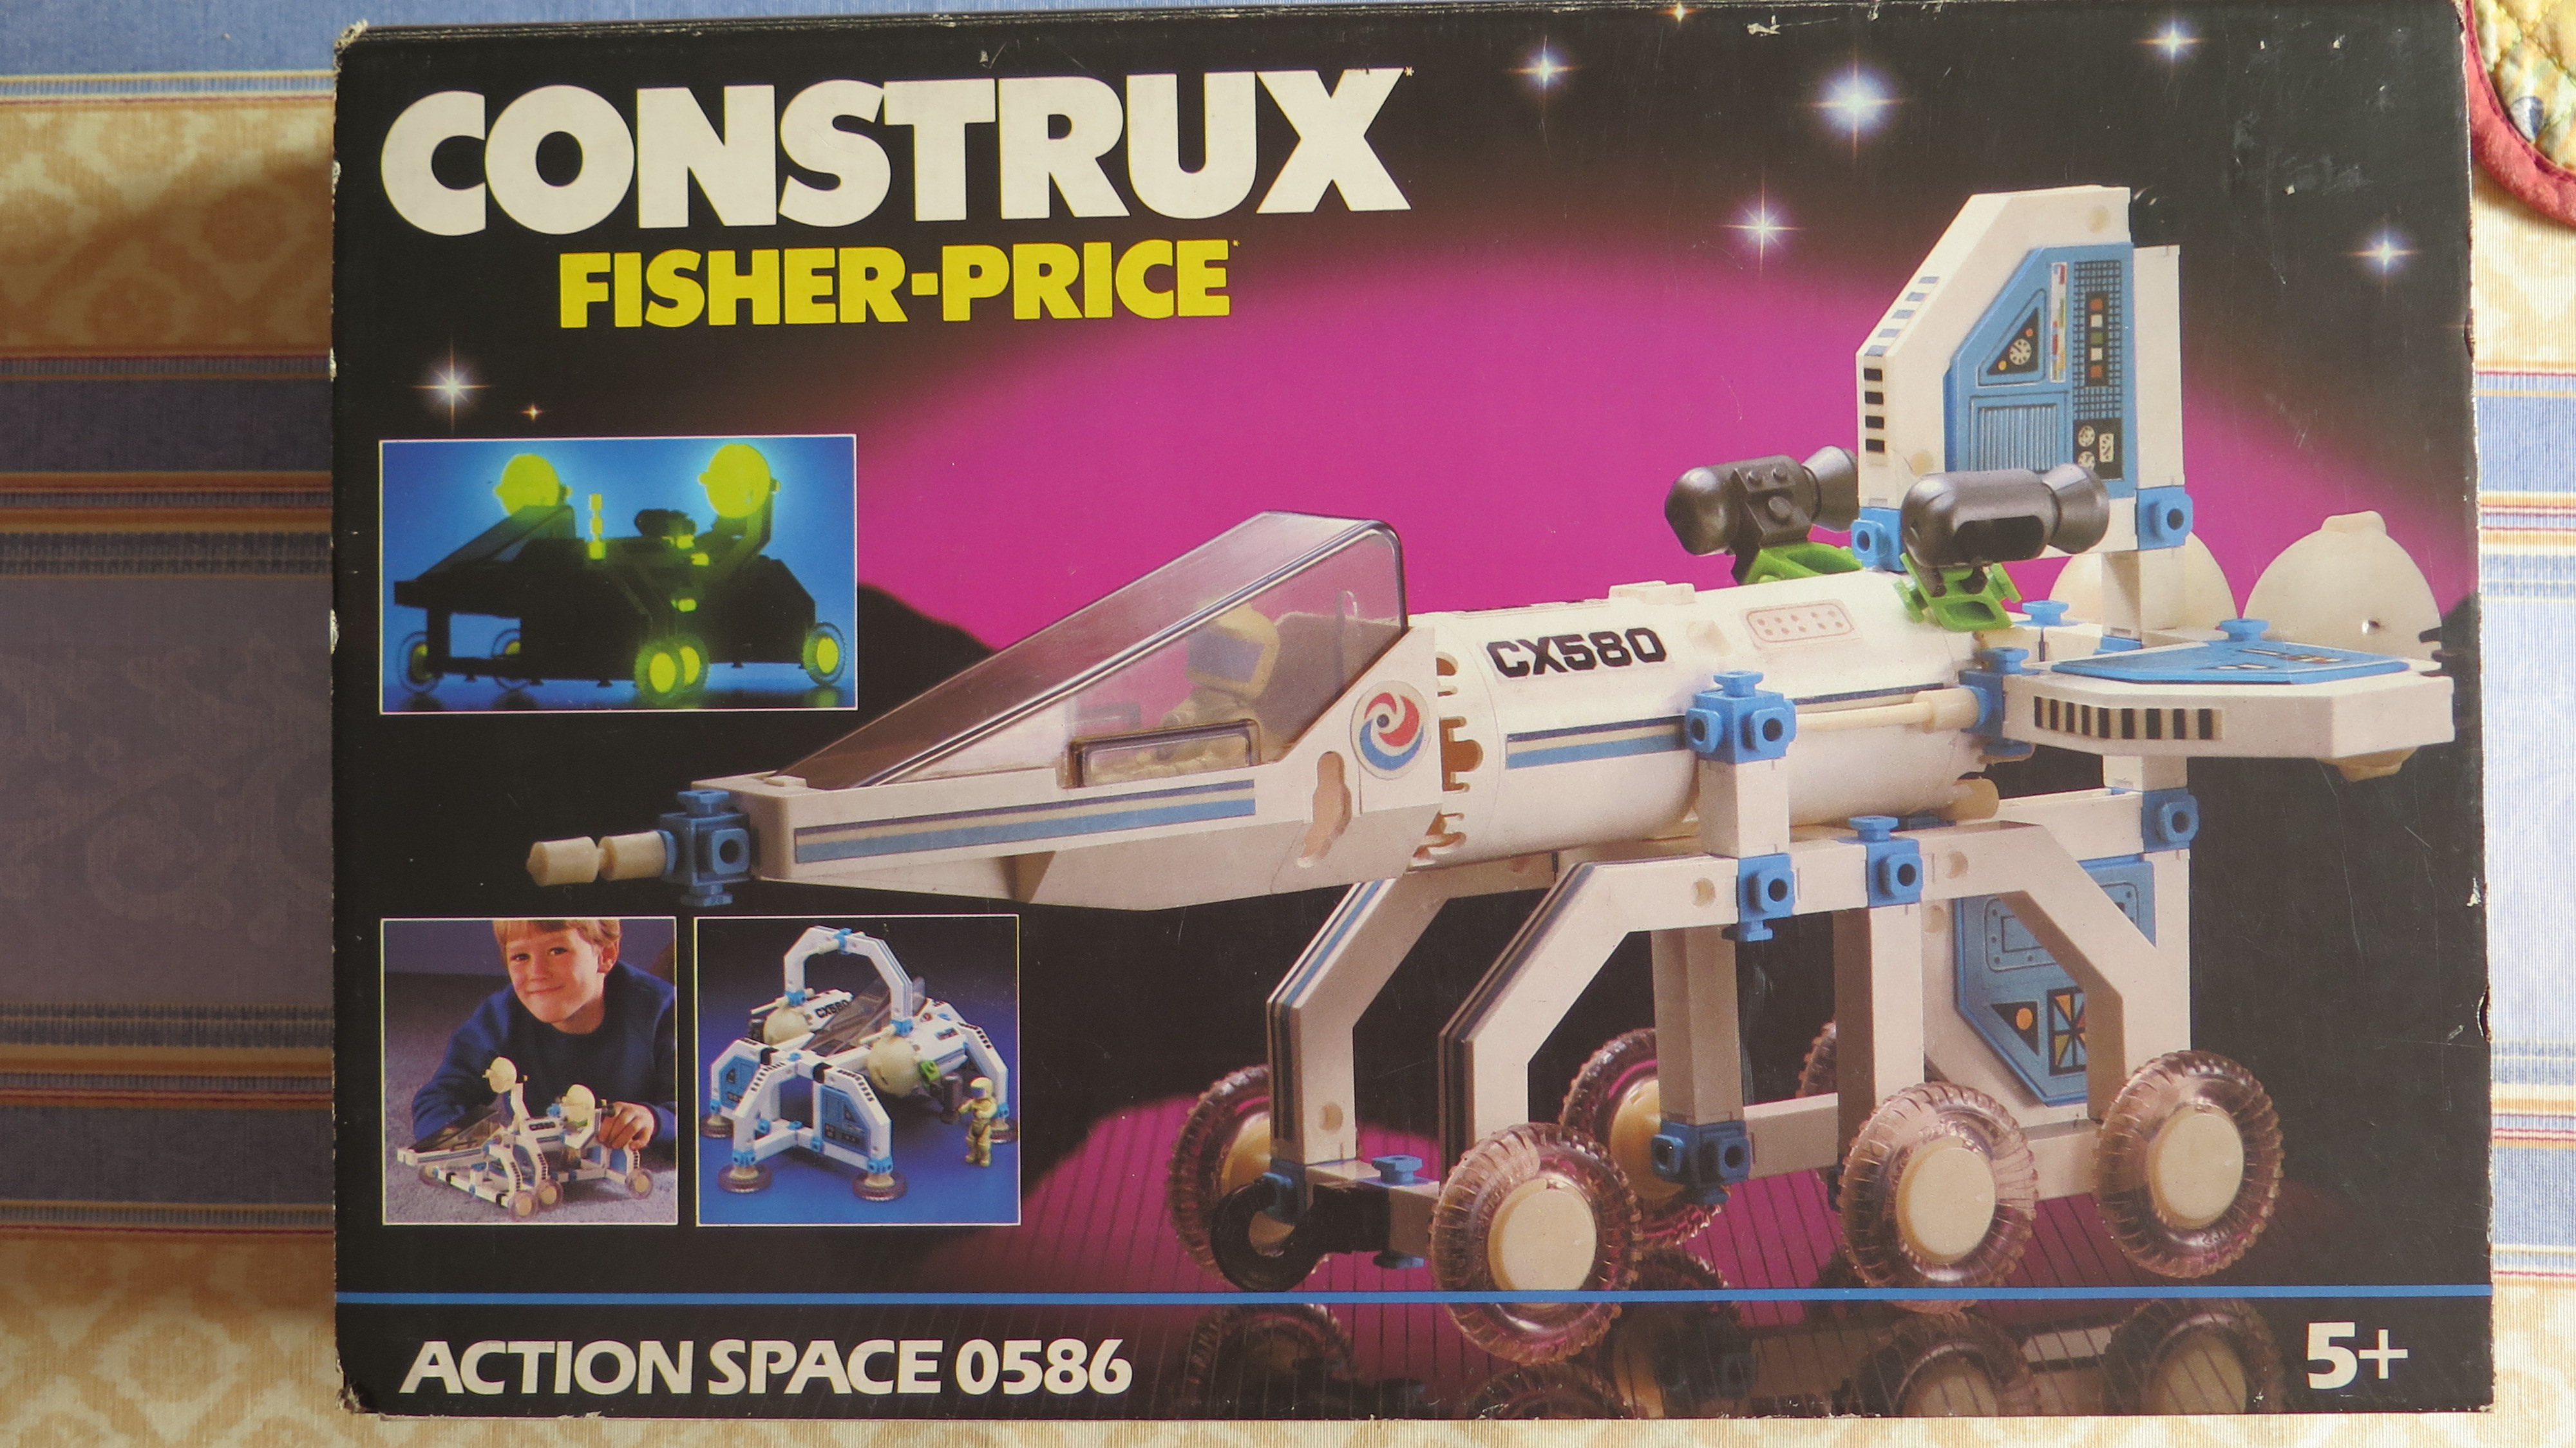 Construx_Fisher-Price Action Space 0586